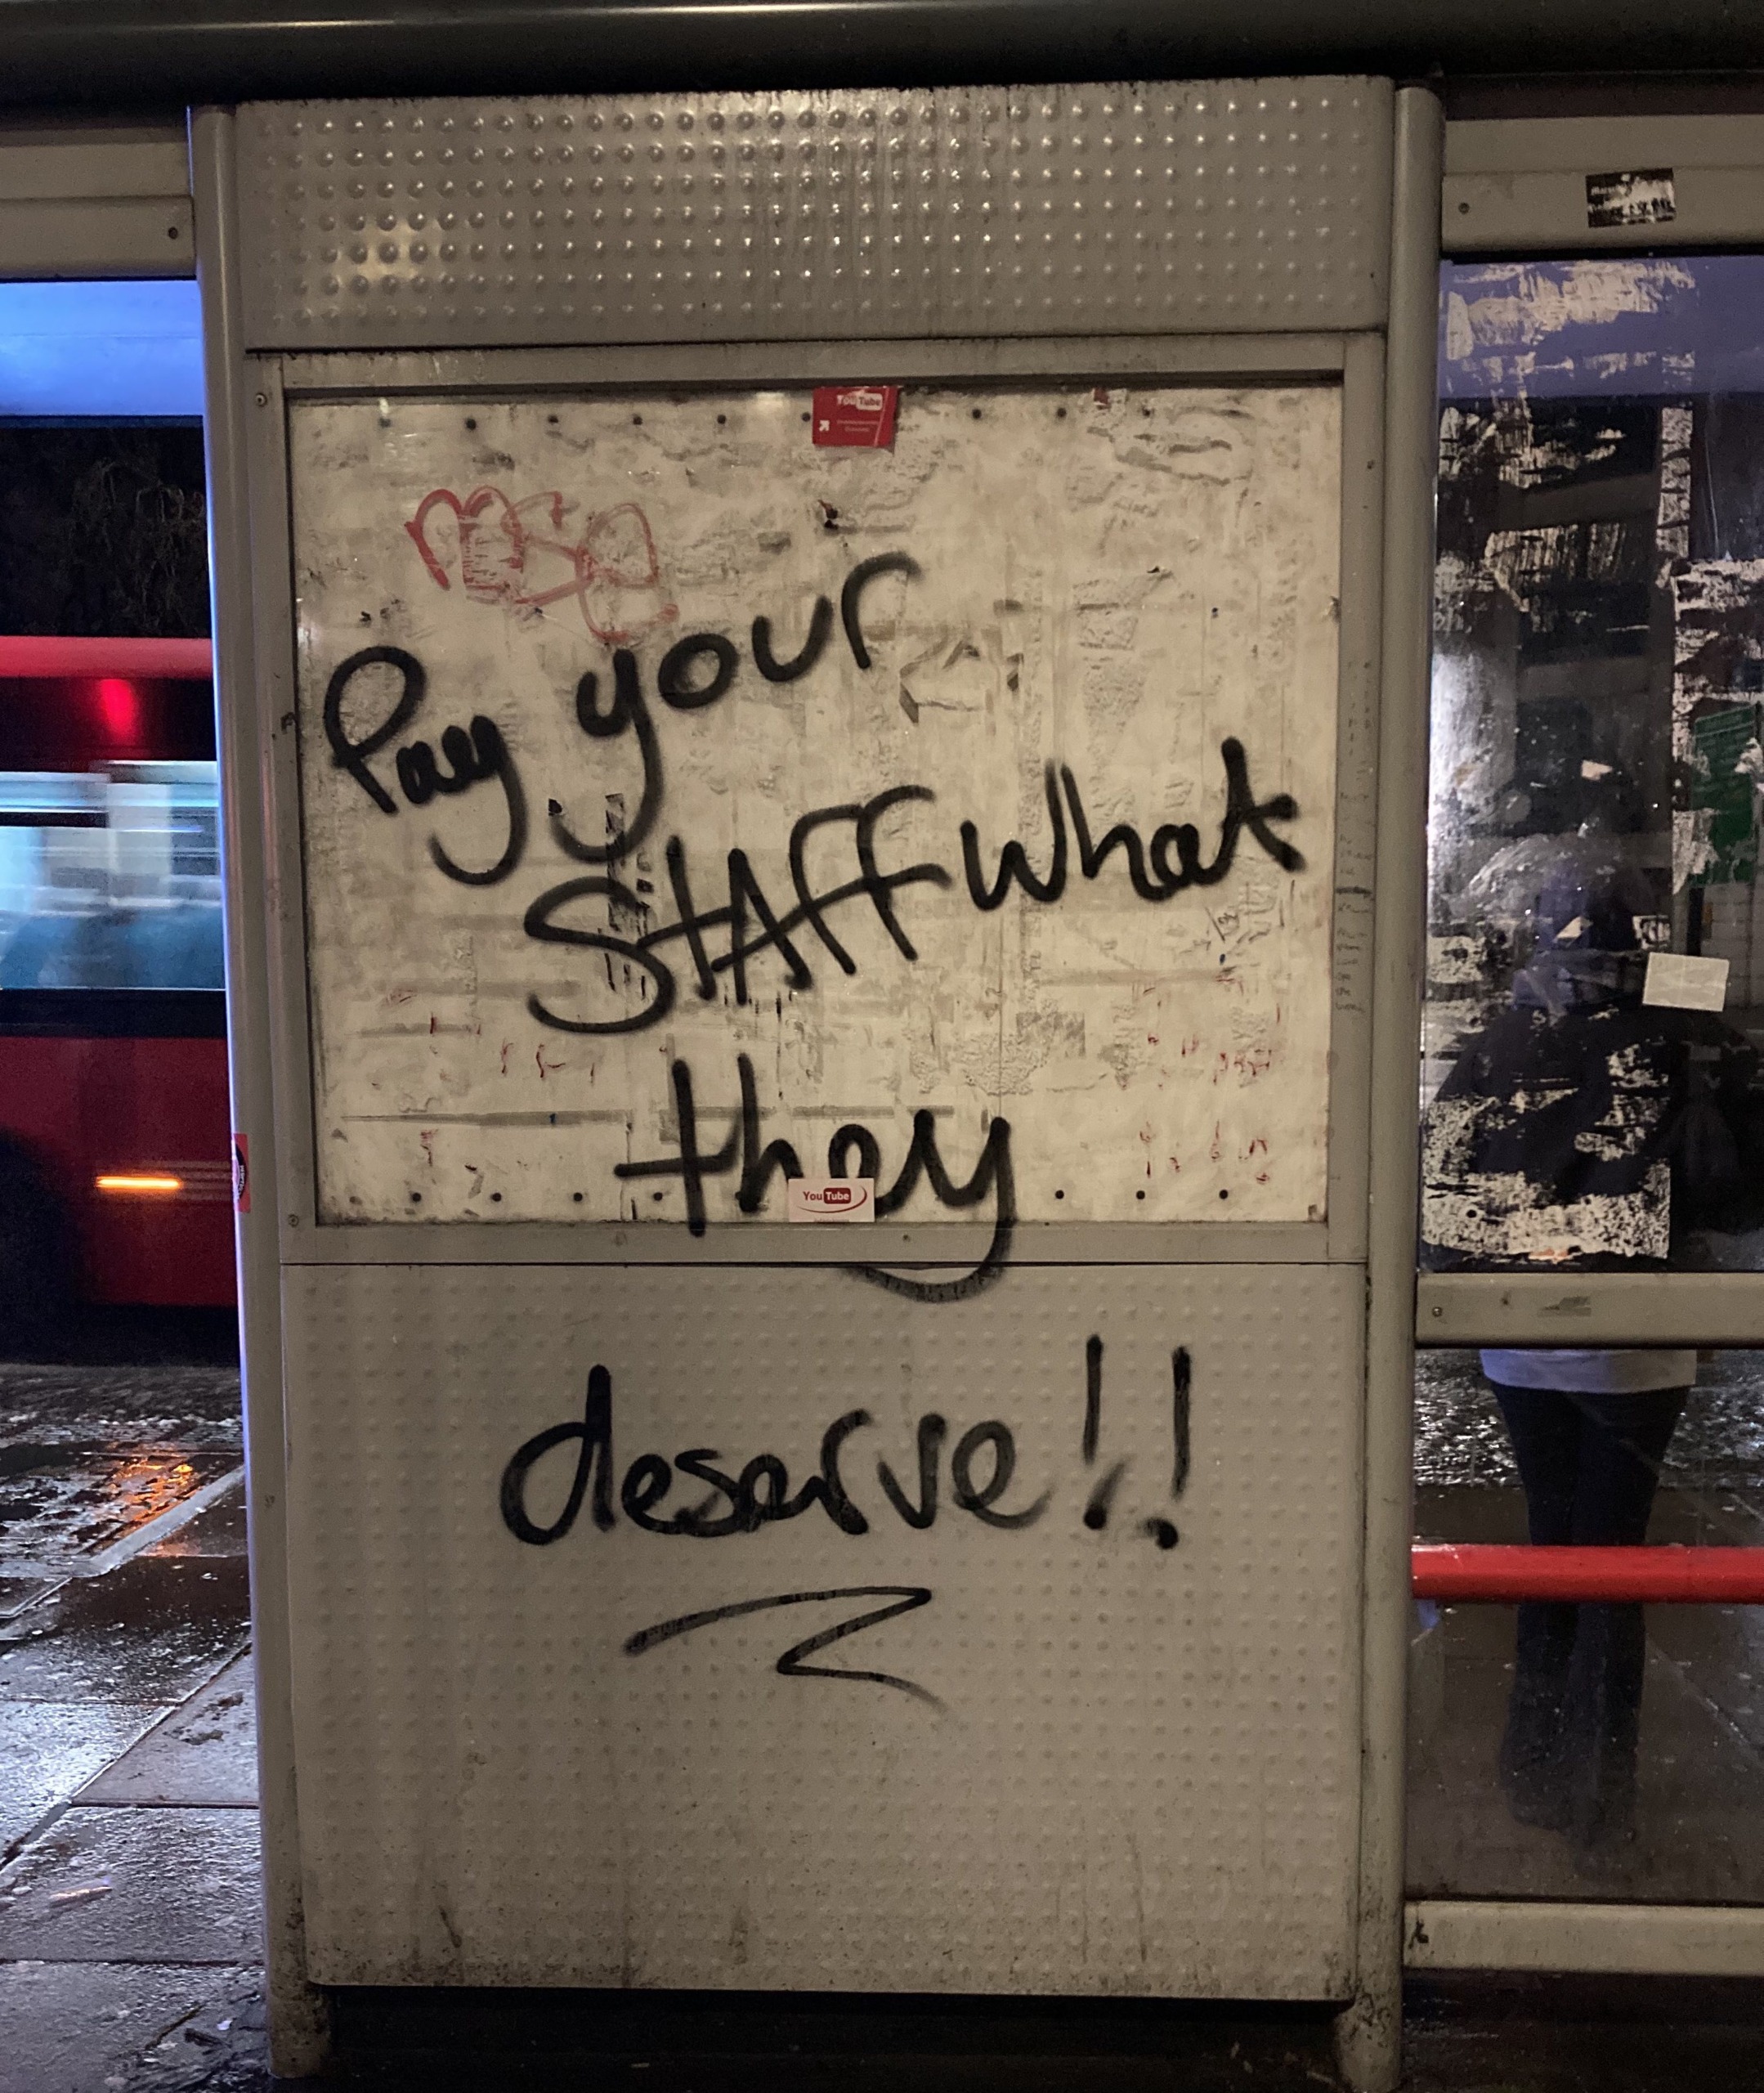 A photo of graffiti on a bus stop reading "Pay your STAFF what they deserve!!"